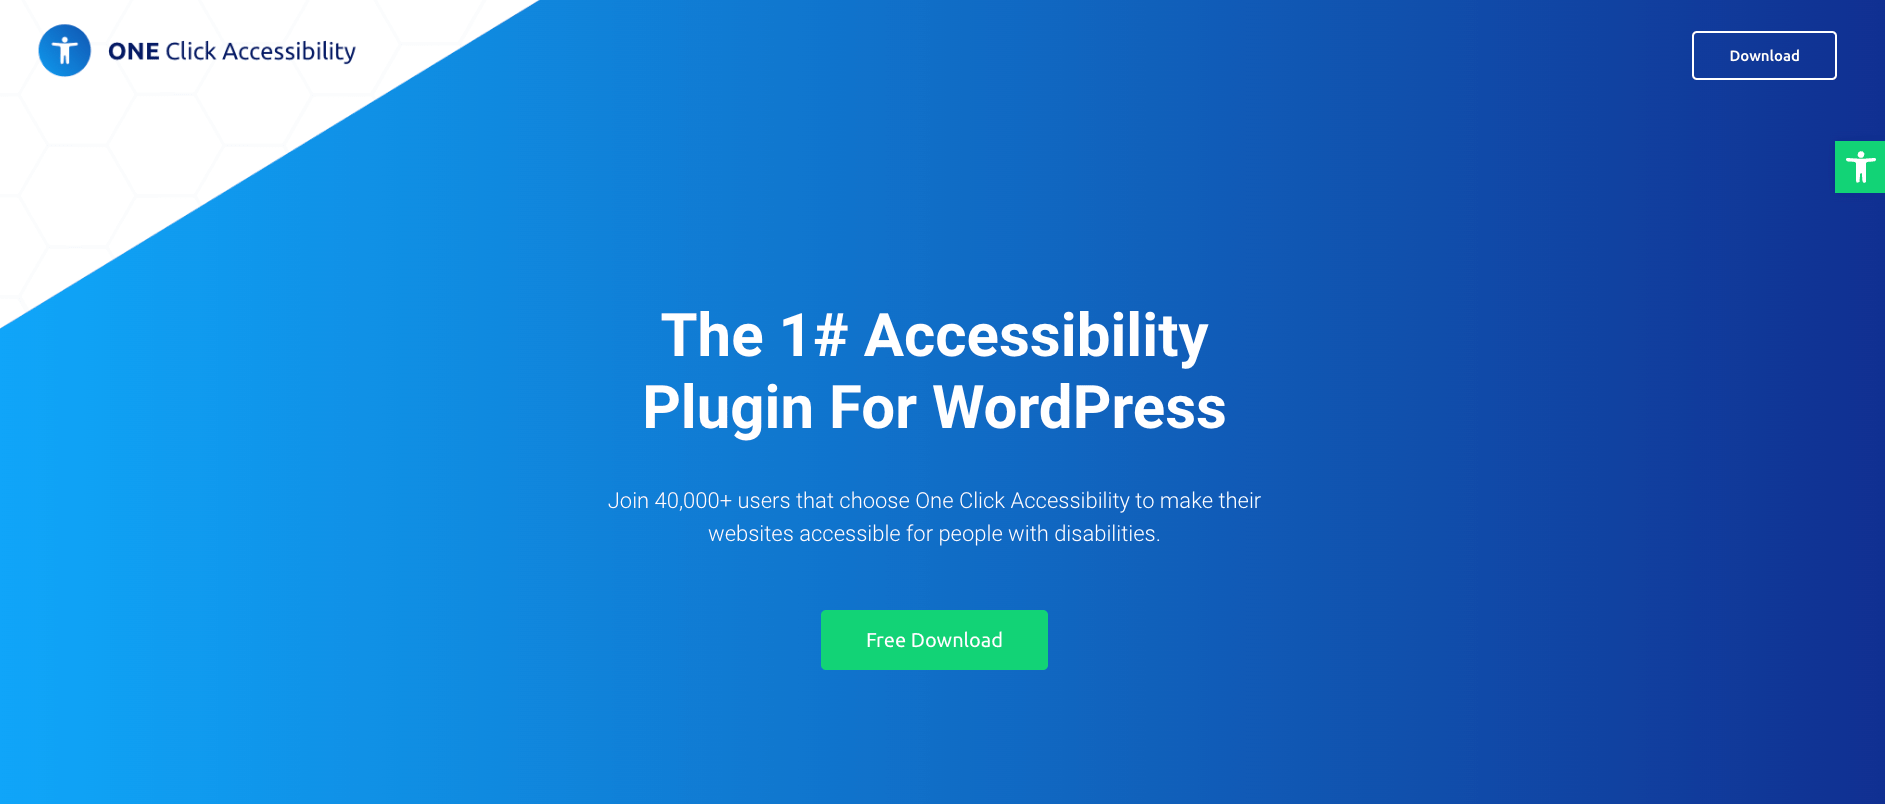 One Click Accessibility Website Banner